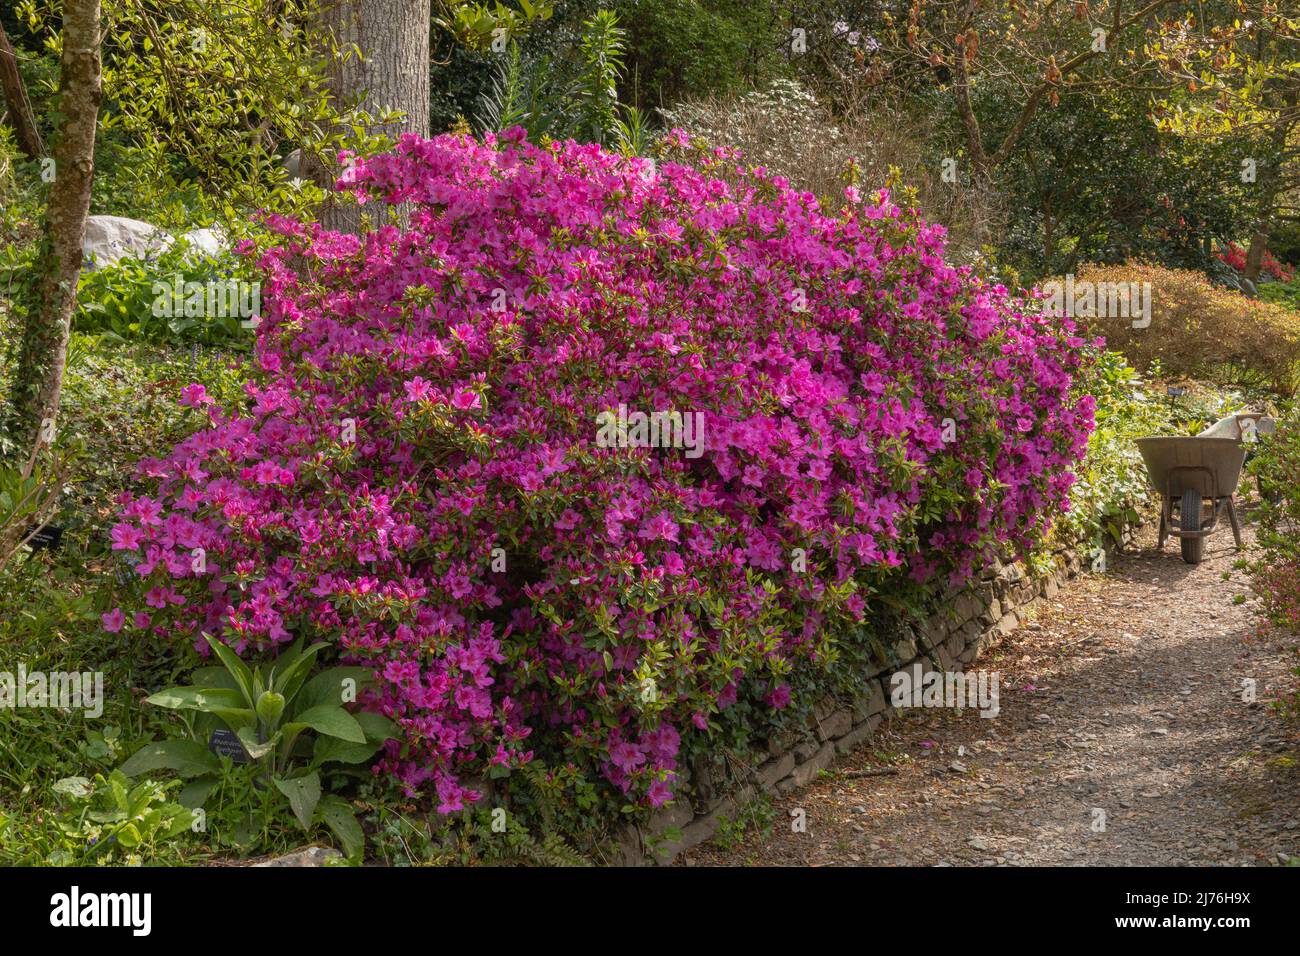 Spring purple flowers of the rhododendron beethoven on the edge of the stone wall and path Stock Photo